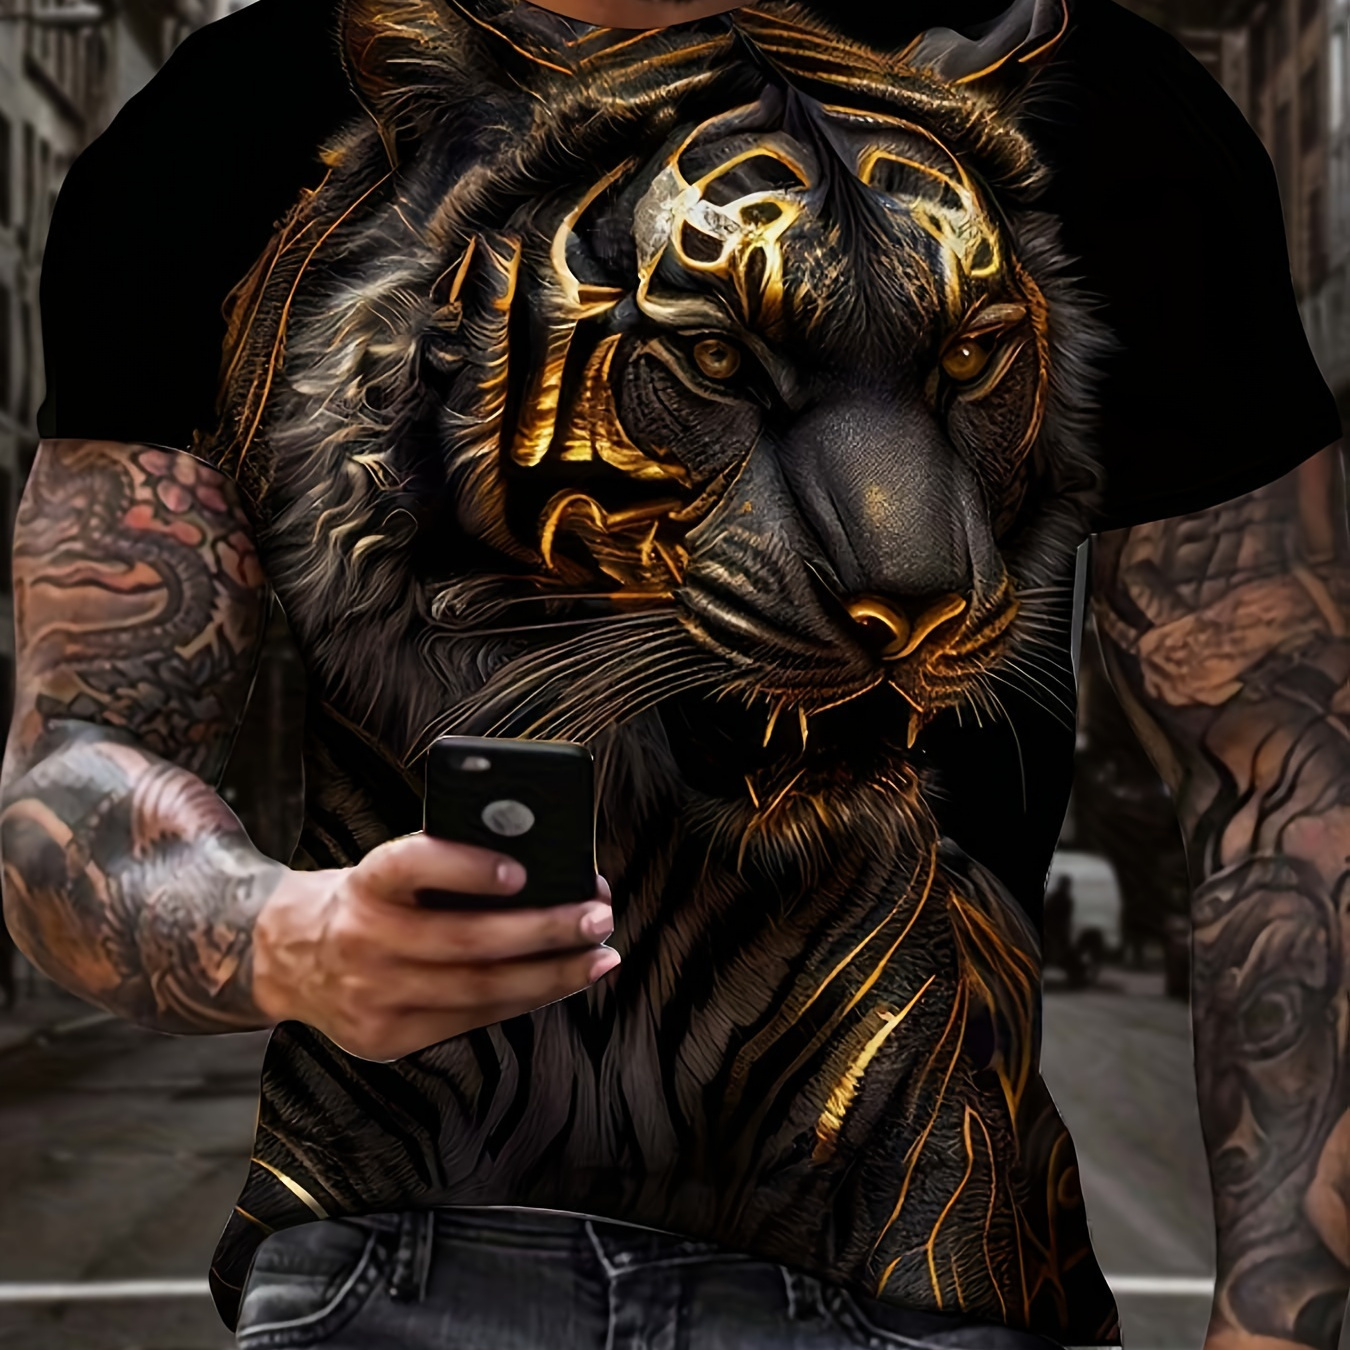 

Stylish Tiger 3d Digital Pattern Print Men's Graphic T-shirt, Causal Comfy Tees, Short Sleeve Pullover Tops, Men's Summer Outdoor Clothing